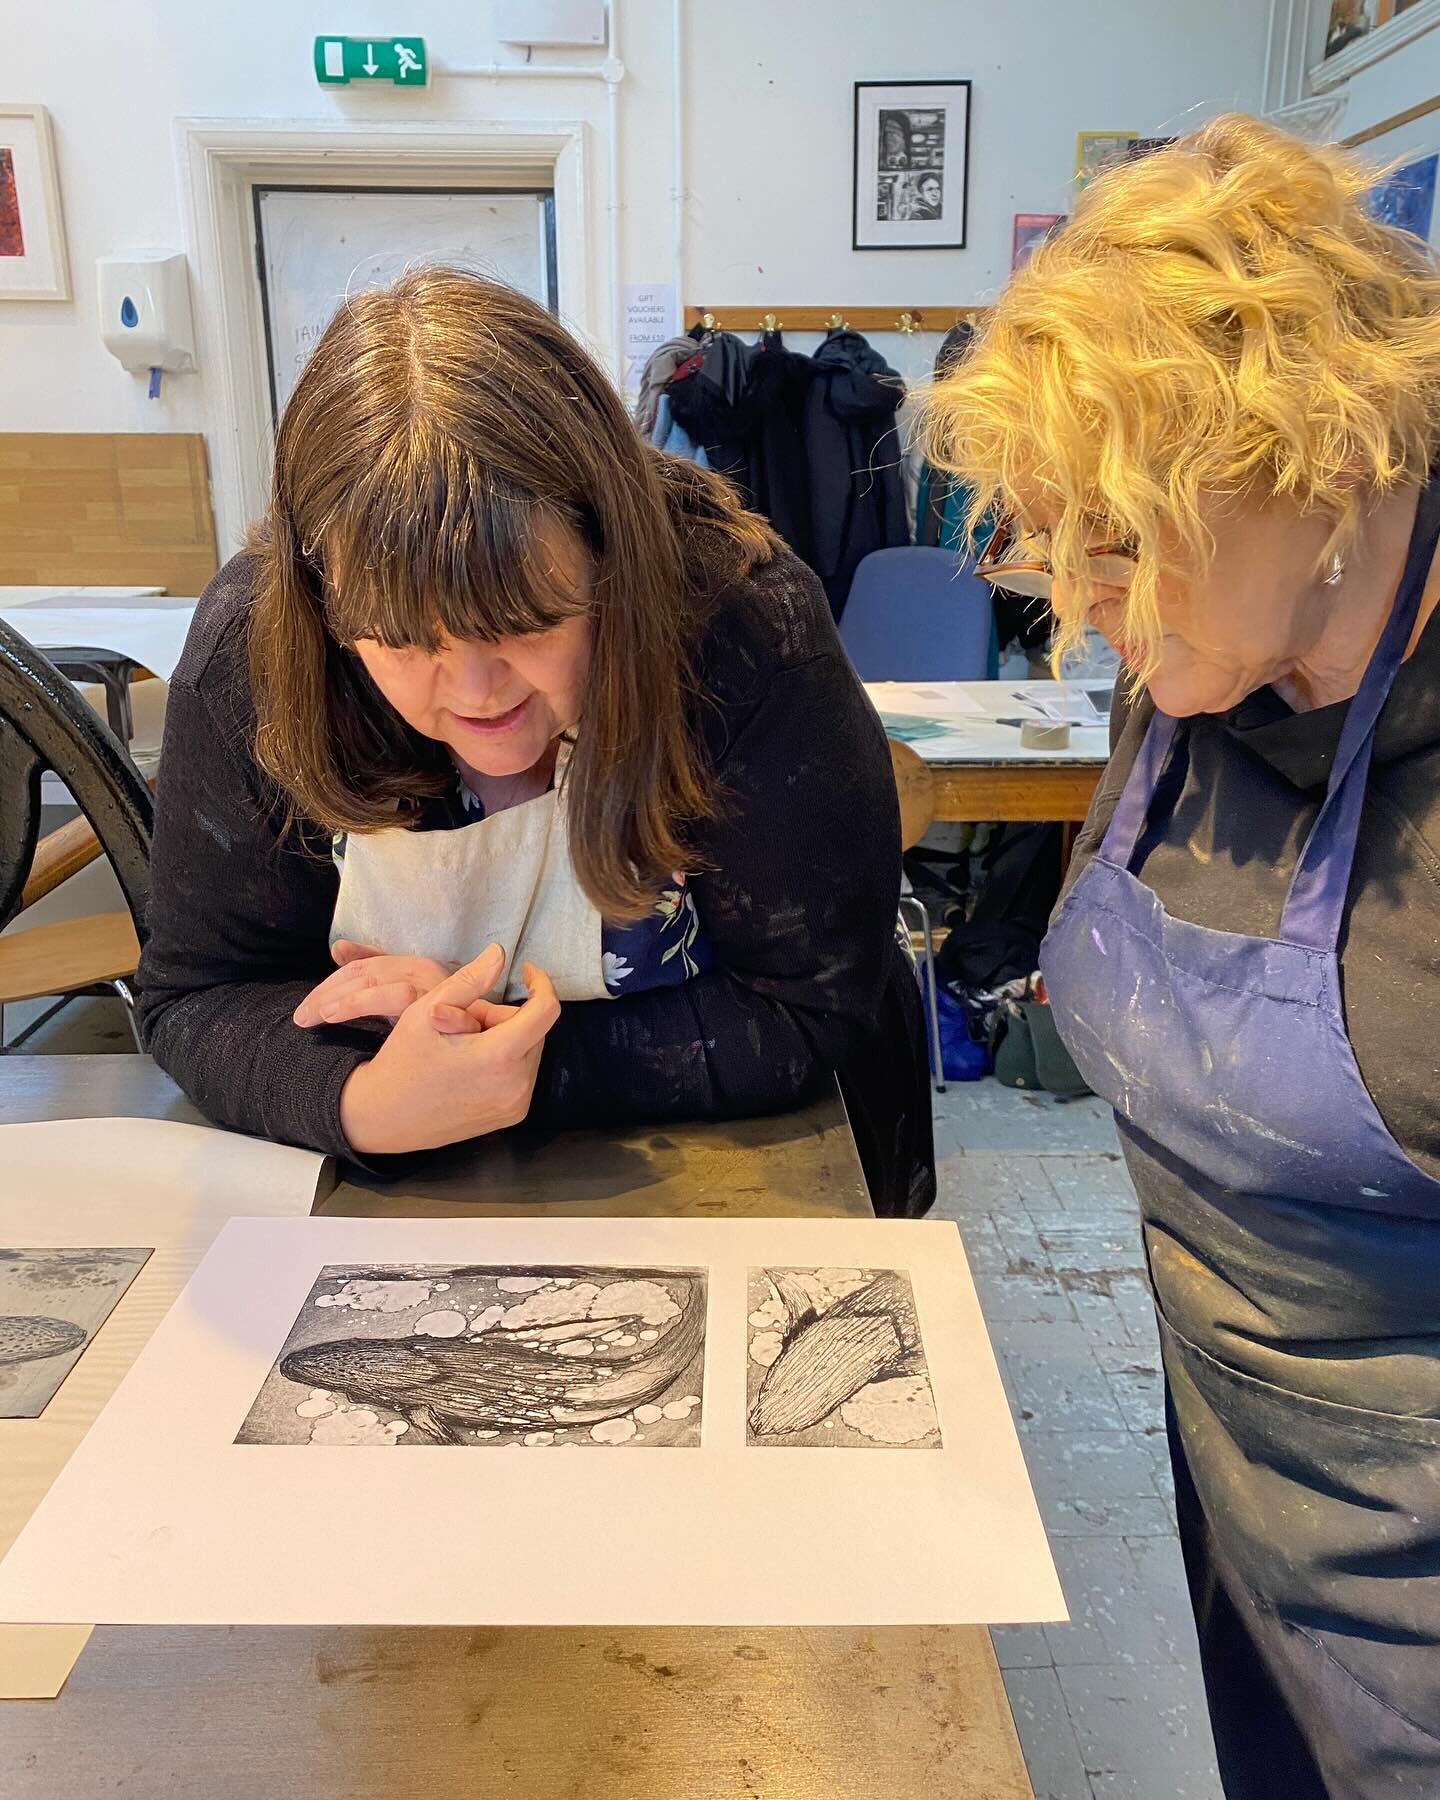 Join me In Lancaster on 6th of April for a days workshop learning drypoint printing making @ironpressprintmaking 
link on my website 
We have so much fun and lots of brilliant work gets made - no experience necessary - just come along for inky fun 
x